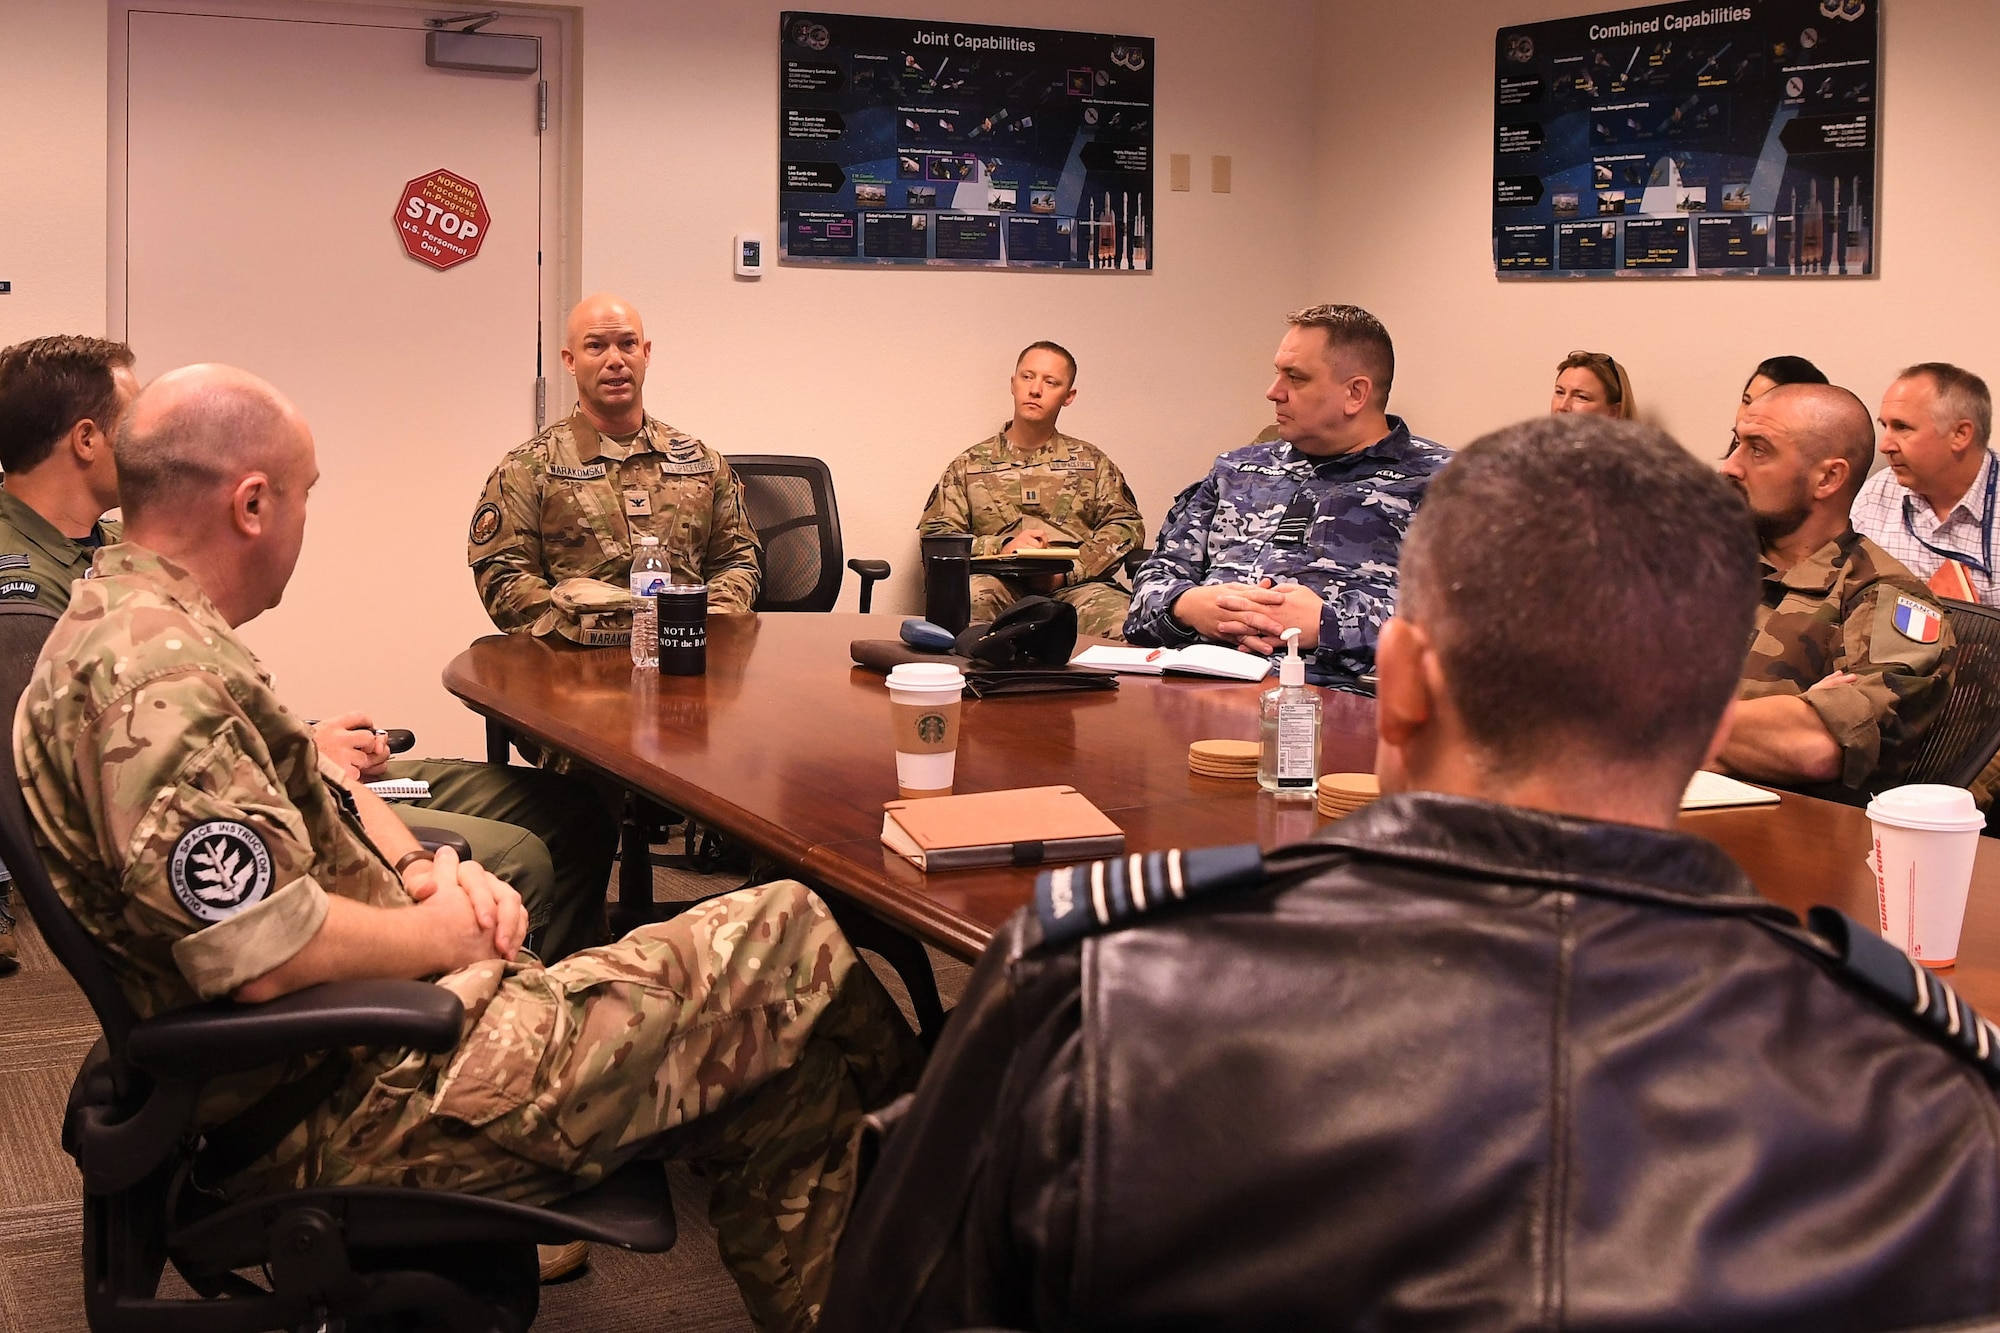 U.S. Space Force Col. Shay Warakomski, Combined Force Space Component Command deputy commander, middle, welcomes participants in the Combined Space Operations Center mission analysis held from Oct. 31 – Nov. 4, 2022, at Vandenberg Space Force Base, Calif. This was the first CSpOC mission analysis conducted since the organization changed from a joint to a combined operating center. Representatives from Australia, Canada, France, Germany, New Zealand, the United Kingdom and the United States were able to provide their feedback during the five-day event. (U.S. Space Force photo by Capt. Erin Recanzone)